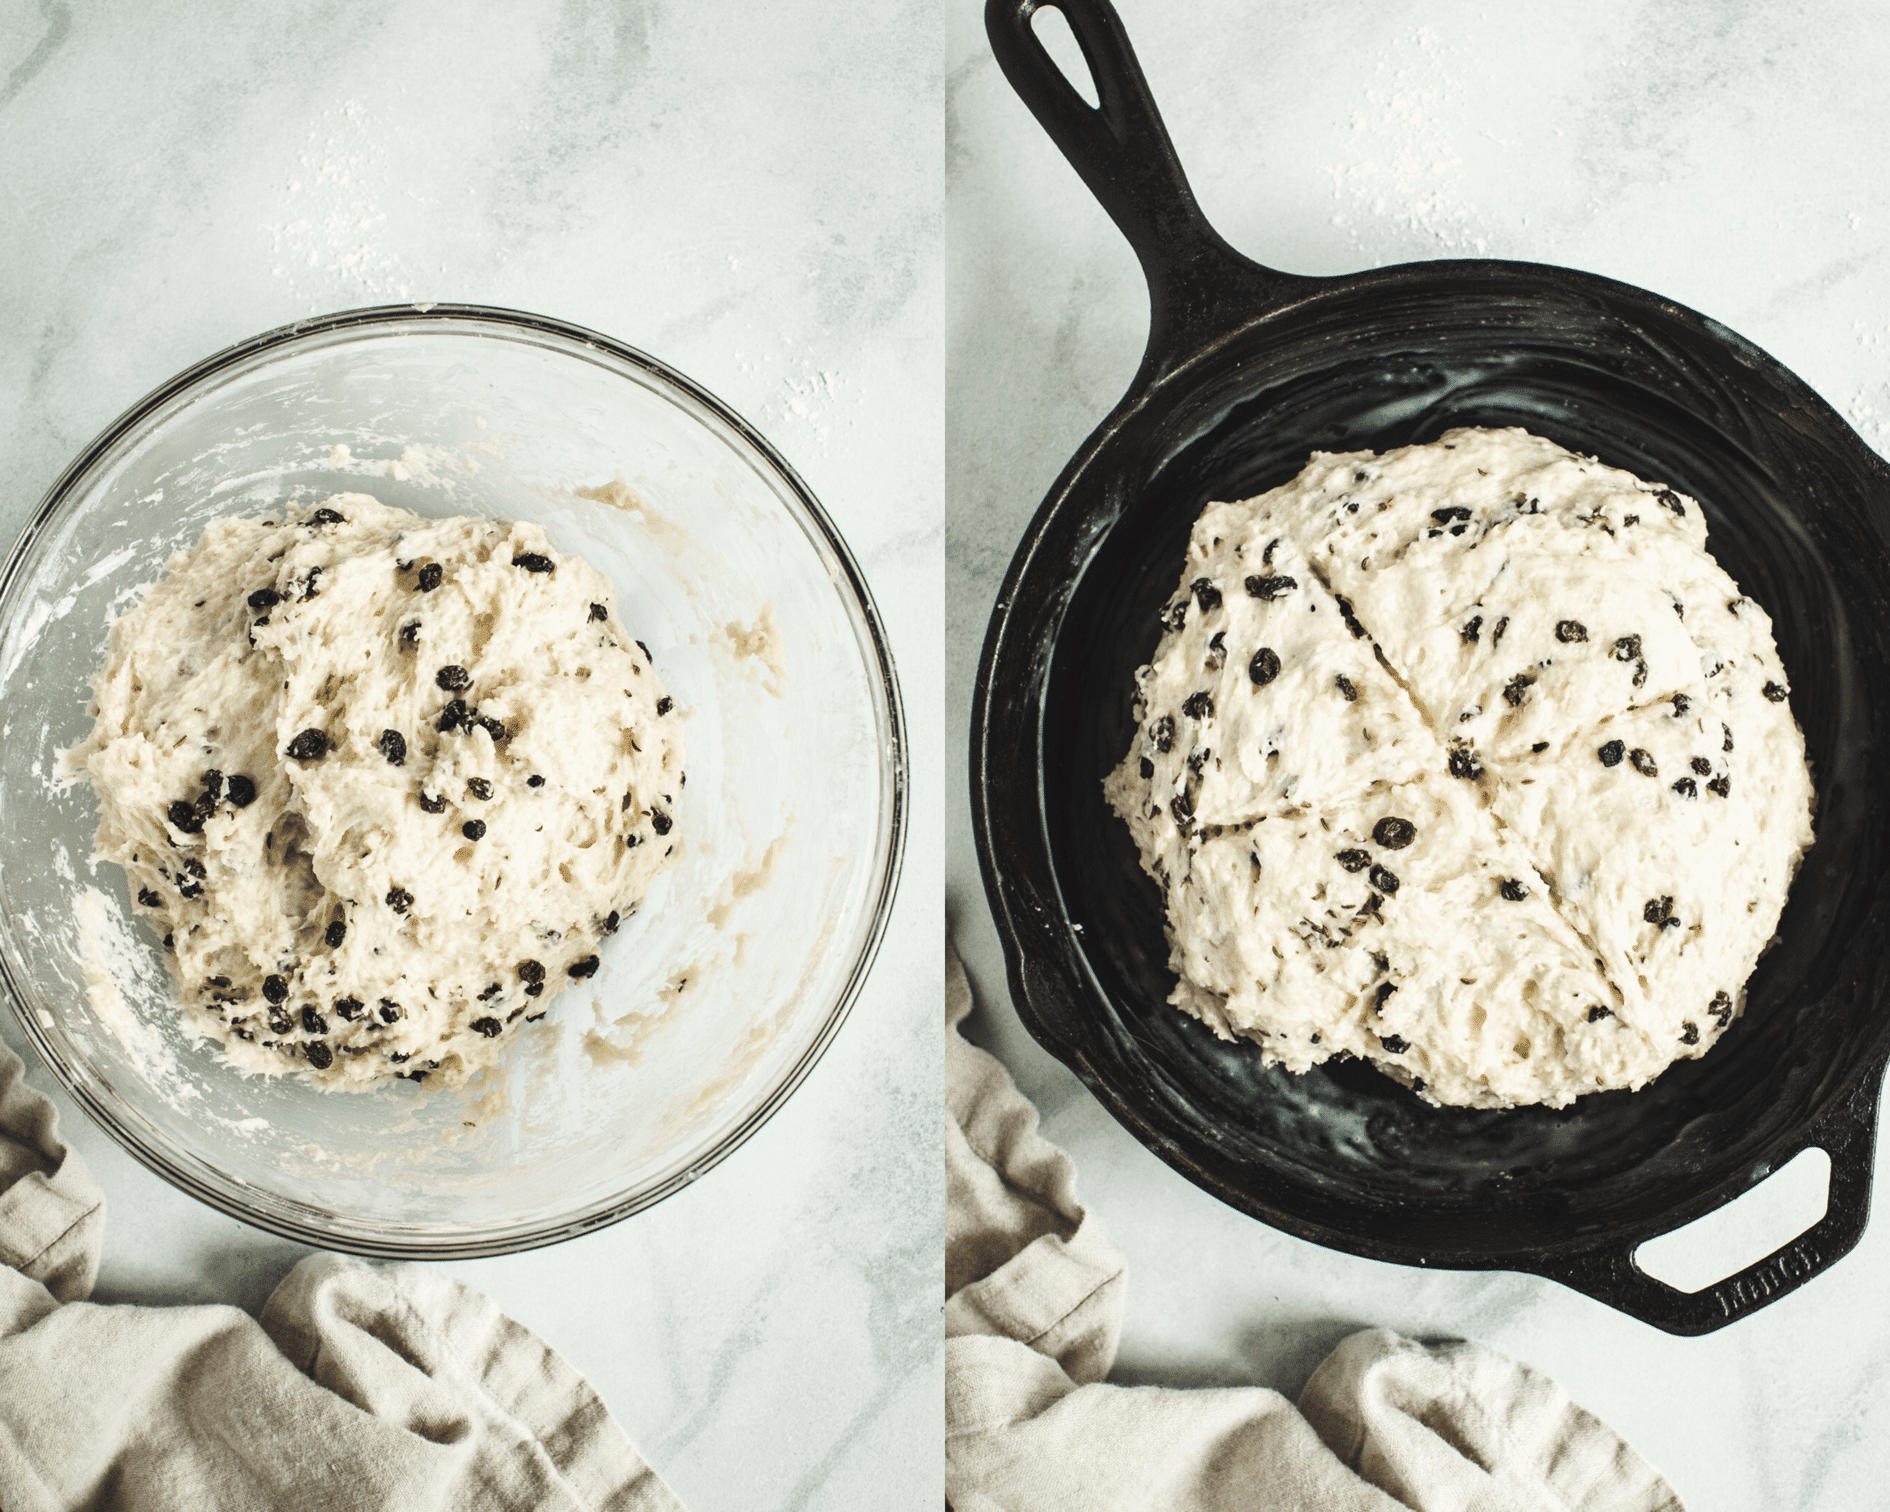 Soda bread batter in a mixing bowl on left and shaped into a ball in a skillet on right.